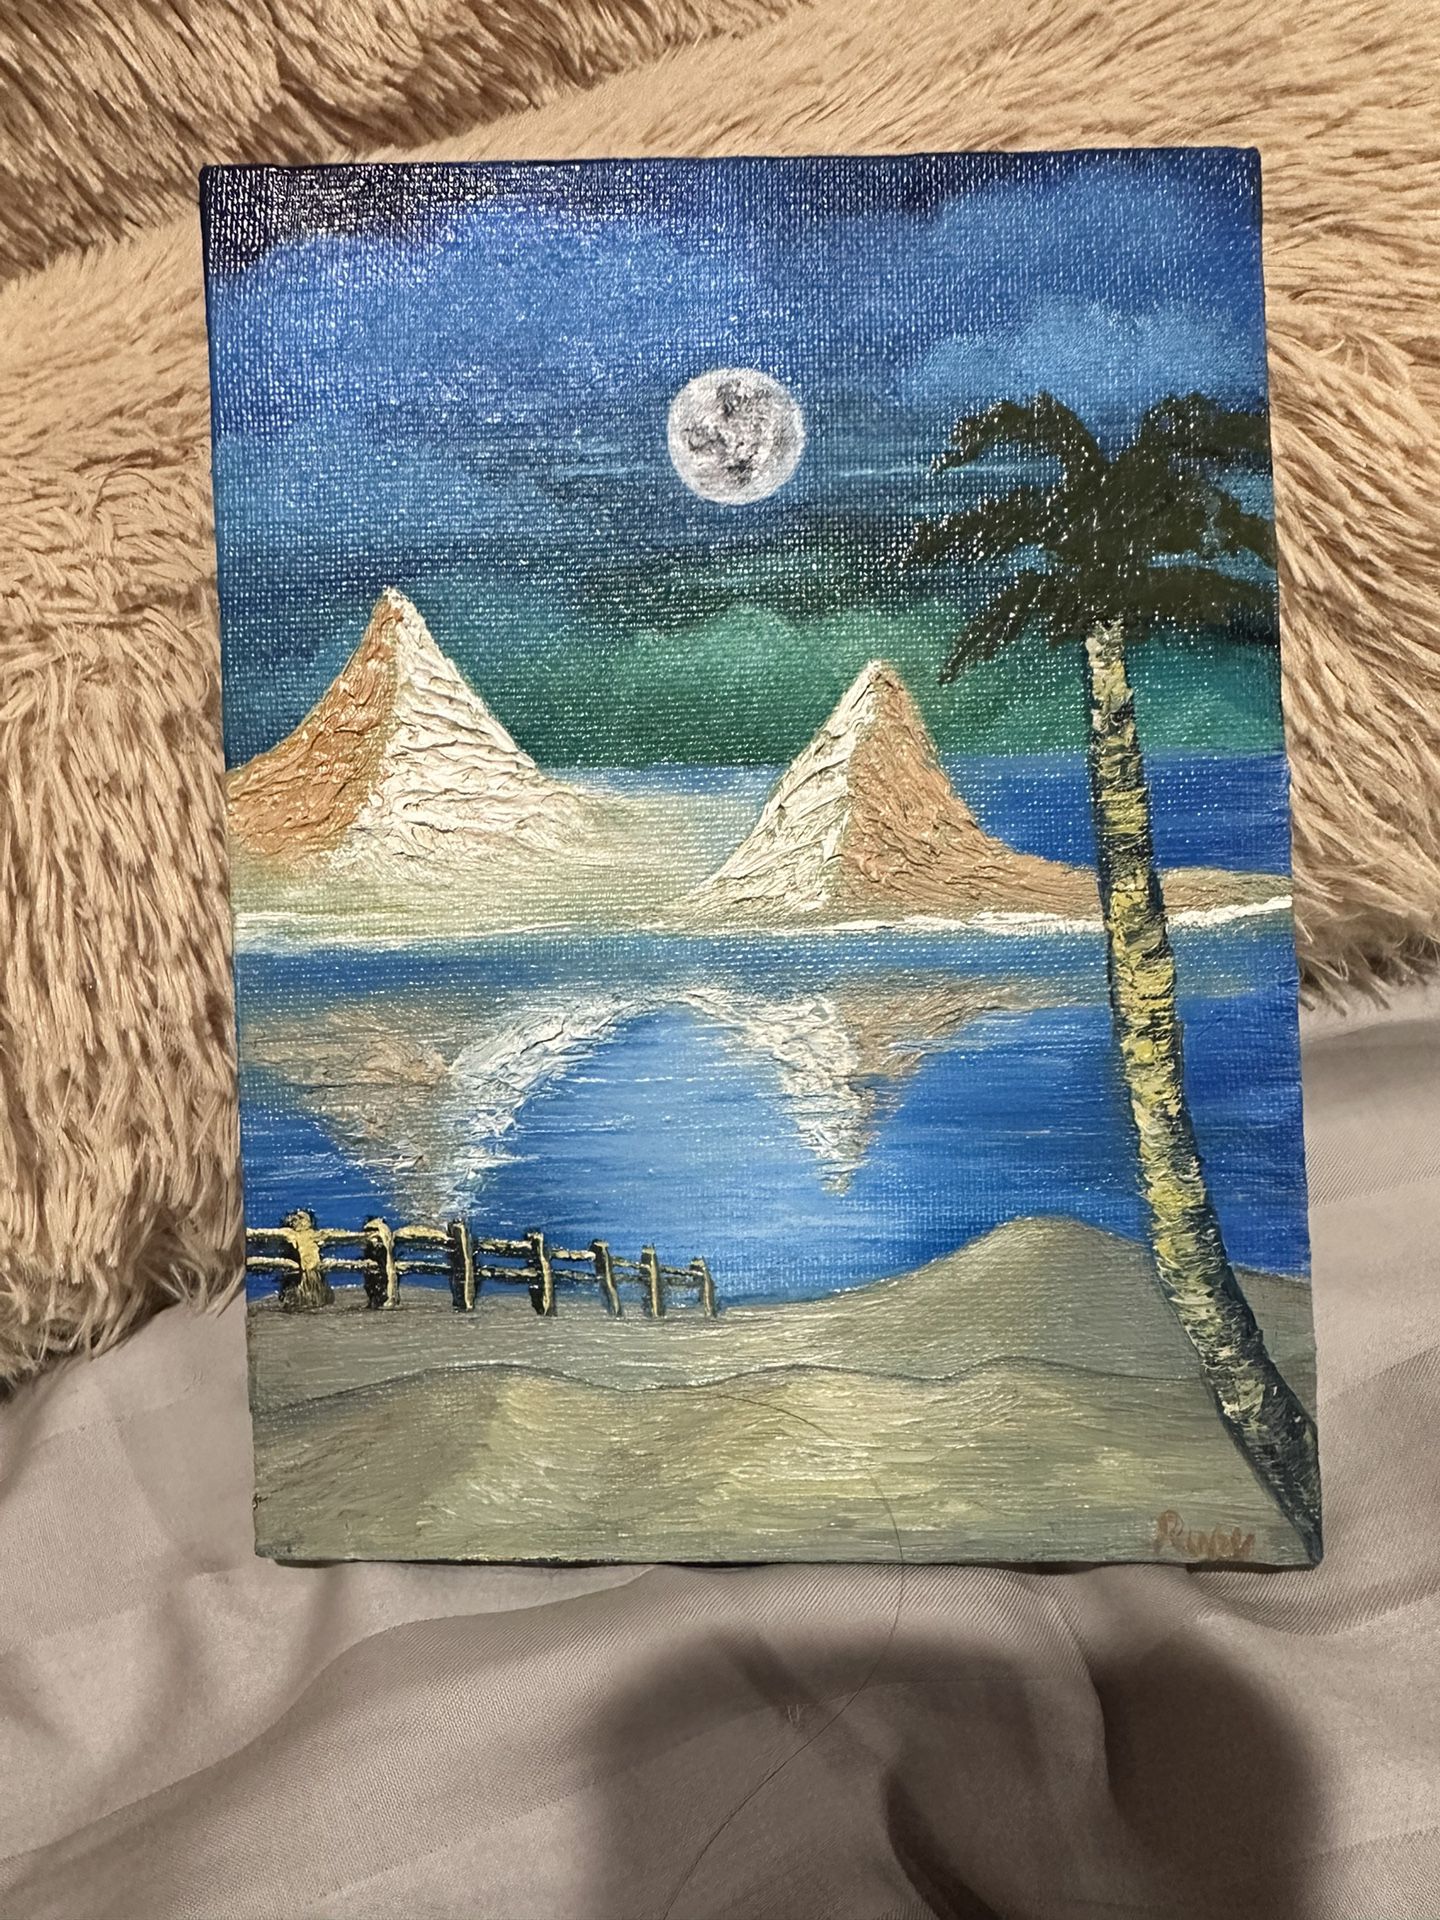 Beach Landscape Oil Painting By Painting With Ruby 